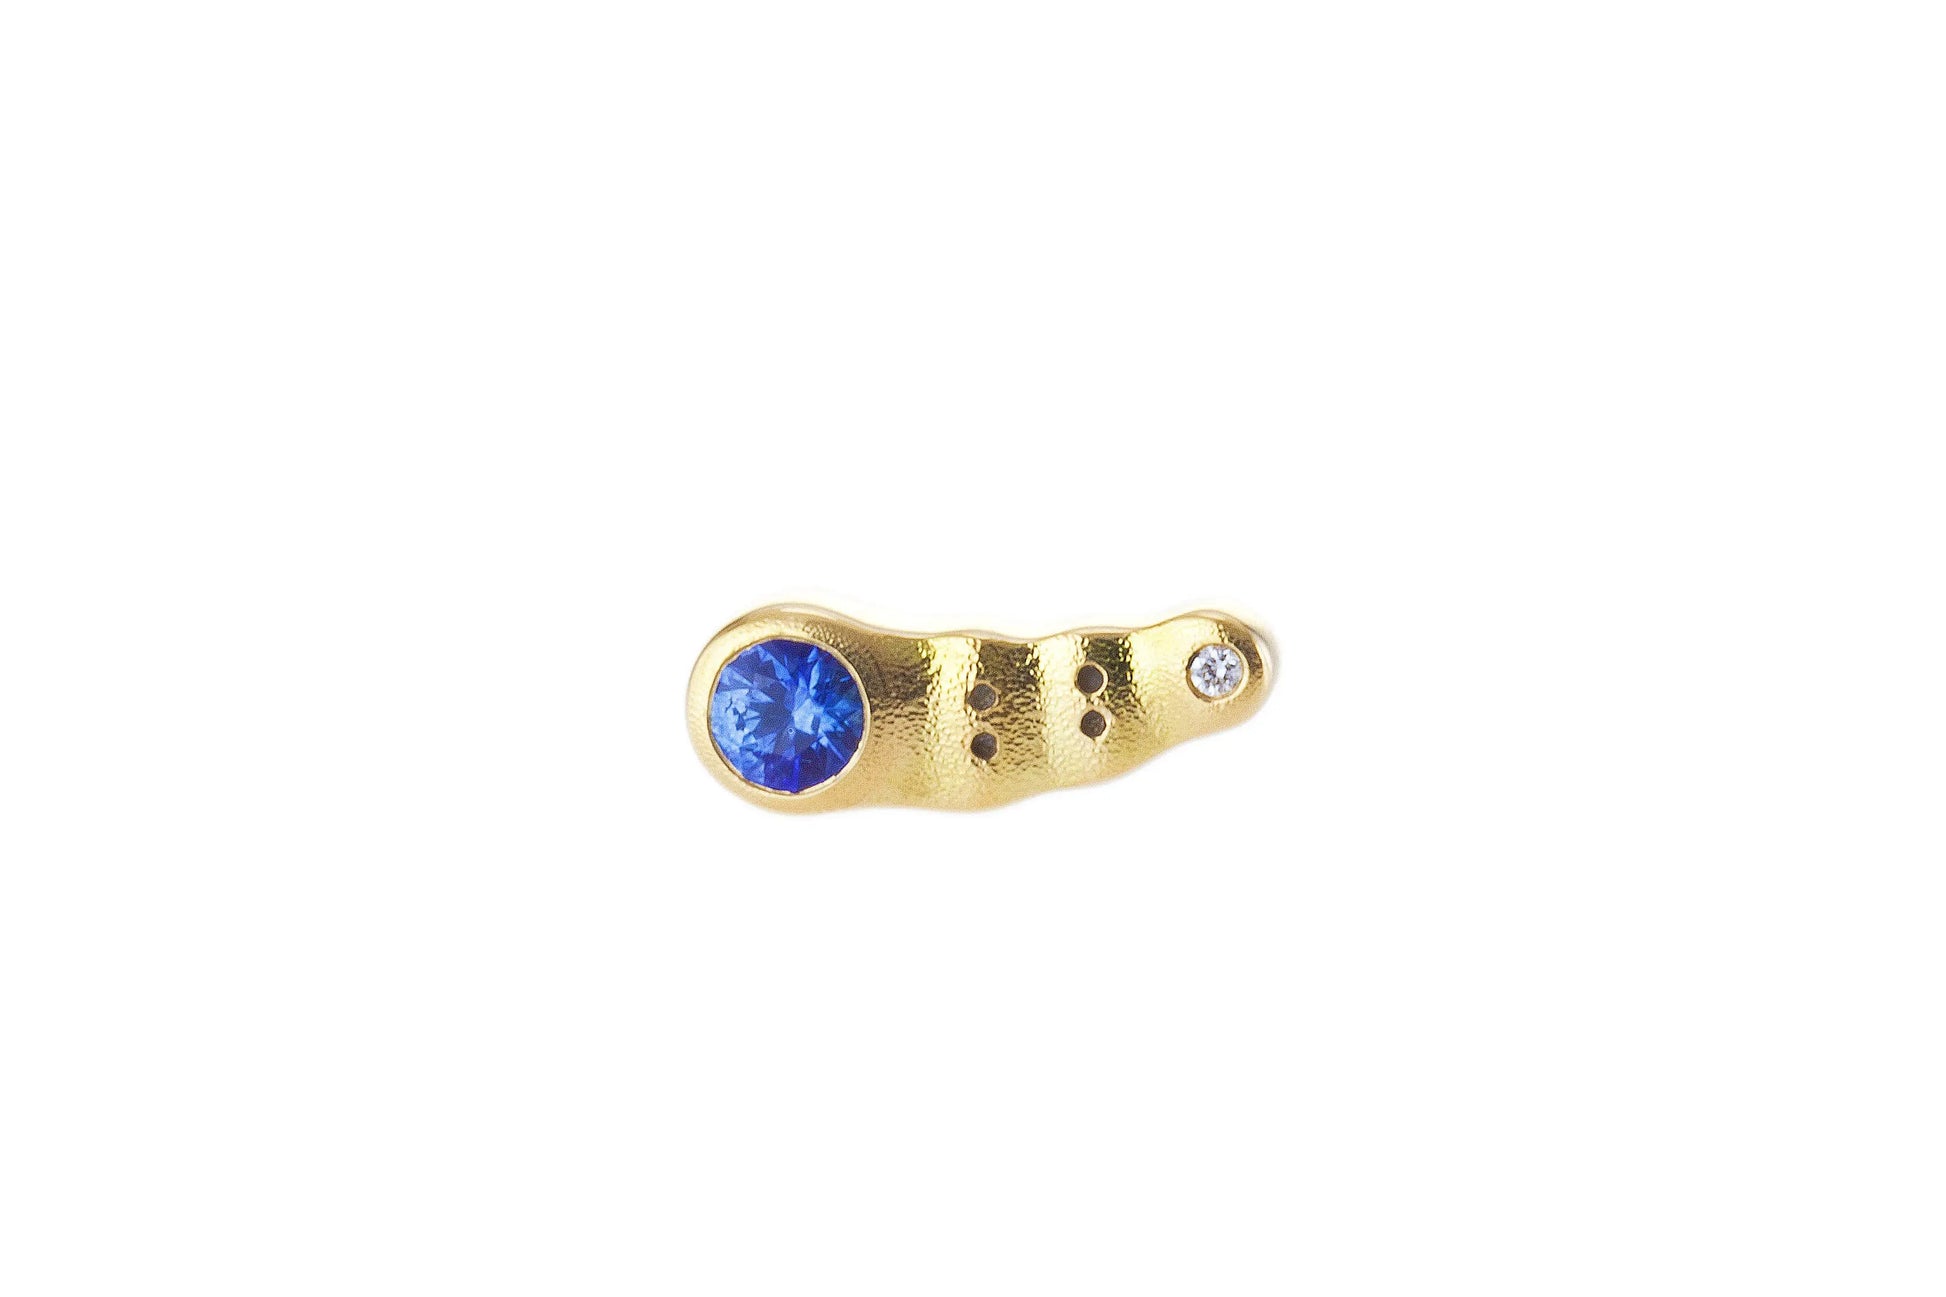 18k yellow gold sapphire and diamond "Flora" studs. Sold as a single  Details: 1 blue sapphire .13ct and 1 diamond .005ct  If you are interested in different stones, please email shop@sbvail.com.  If an item is out of stock, please allow 4-6 weeks for delivery.  Designed by Alex Sepkus